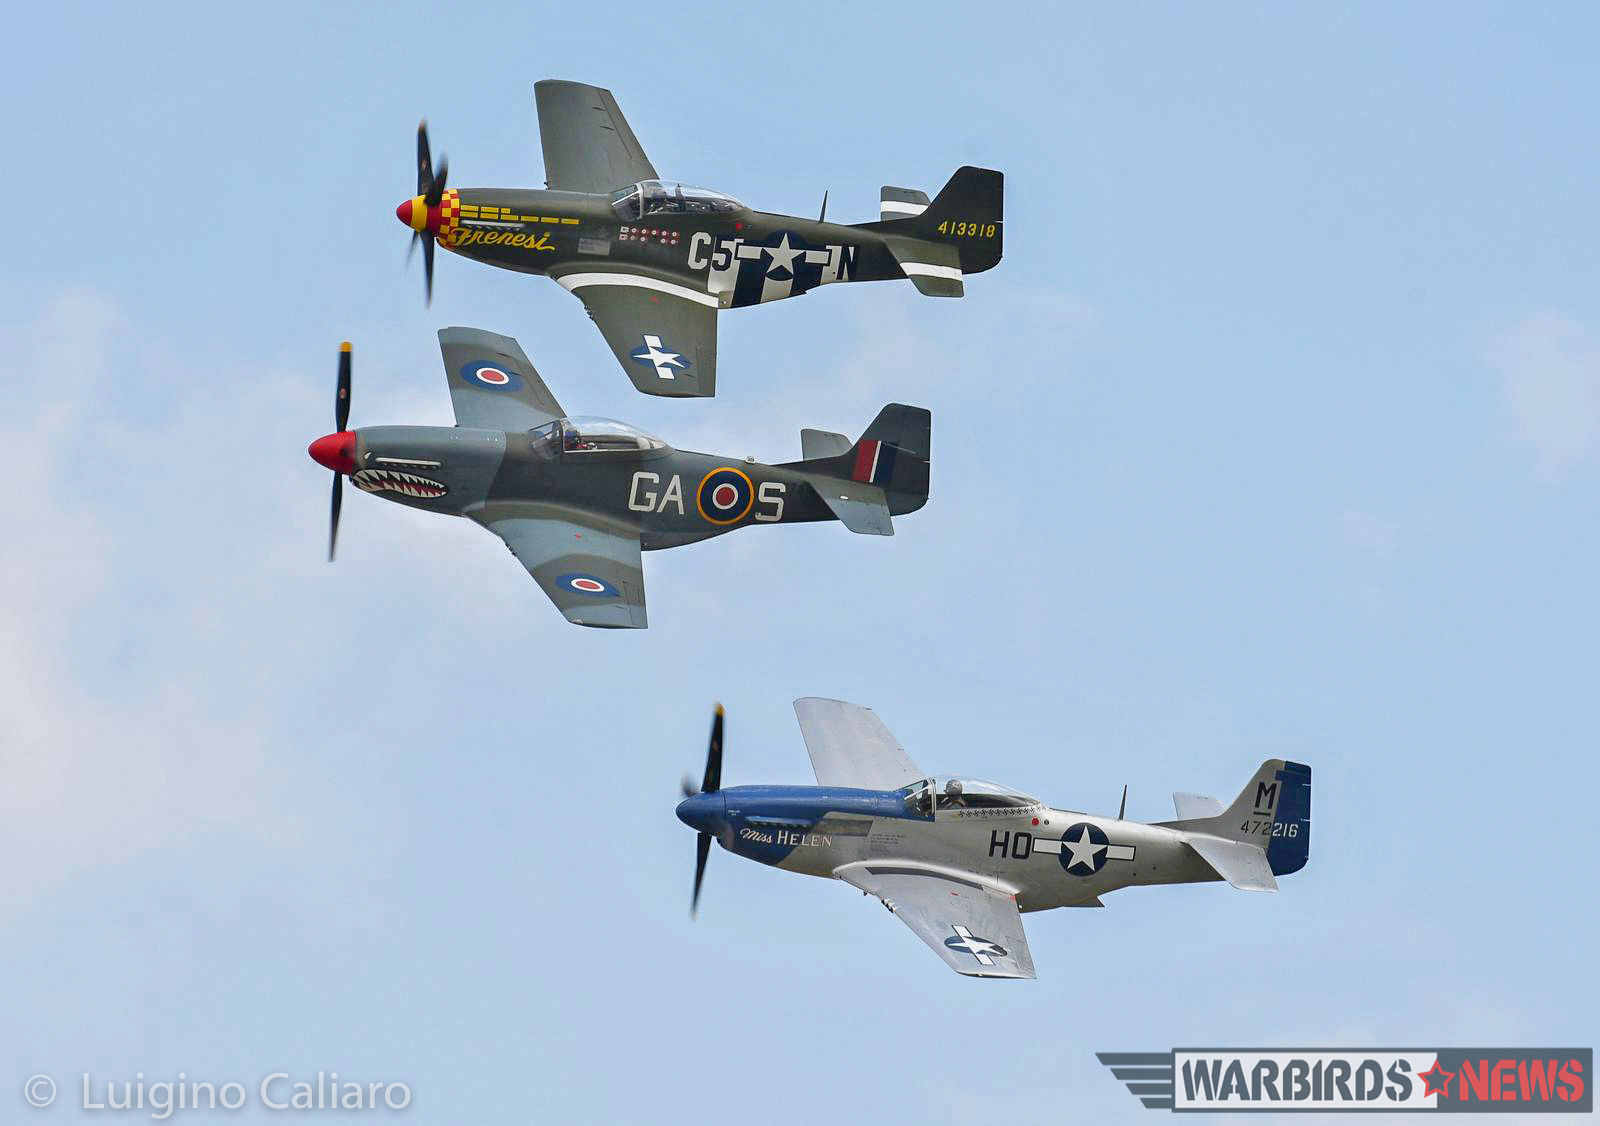 Some of the Mustangs in formation. (photo by Luigino Caliaro)